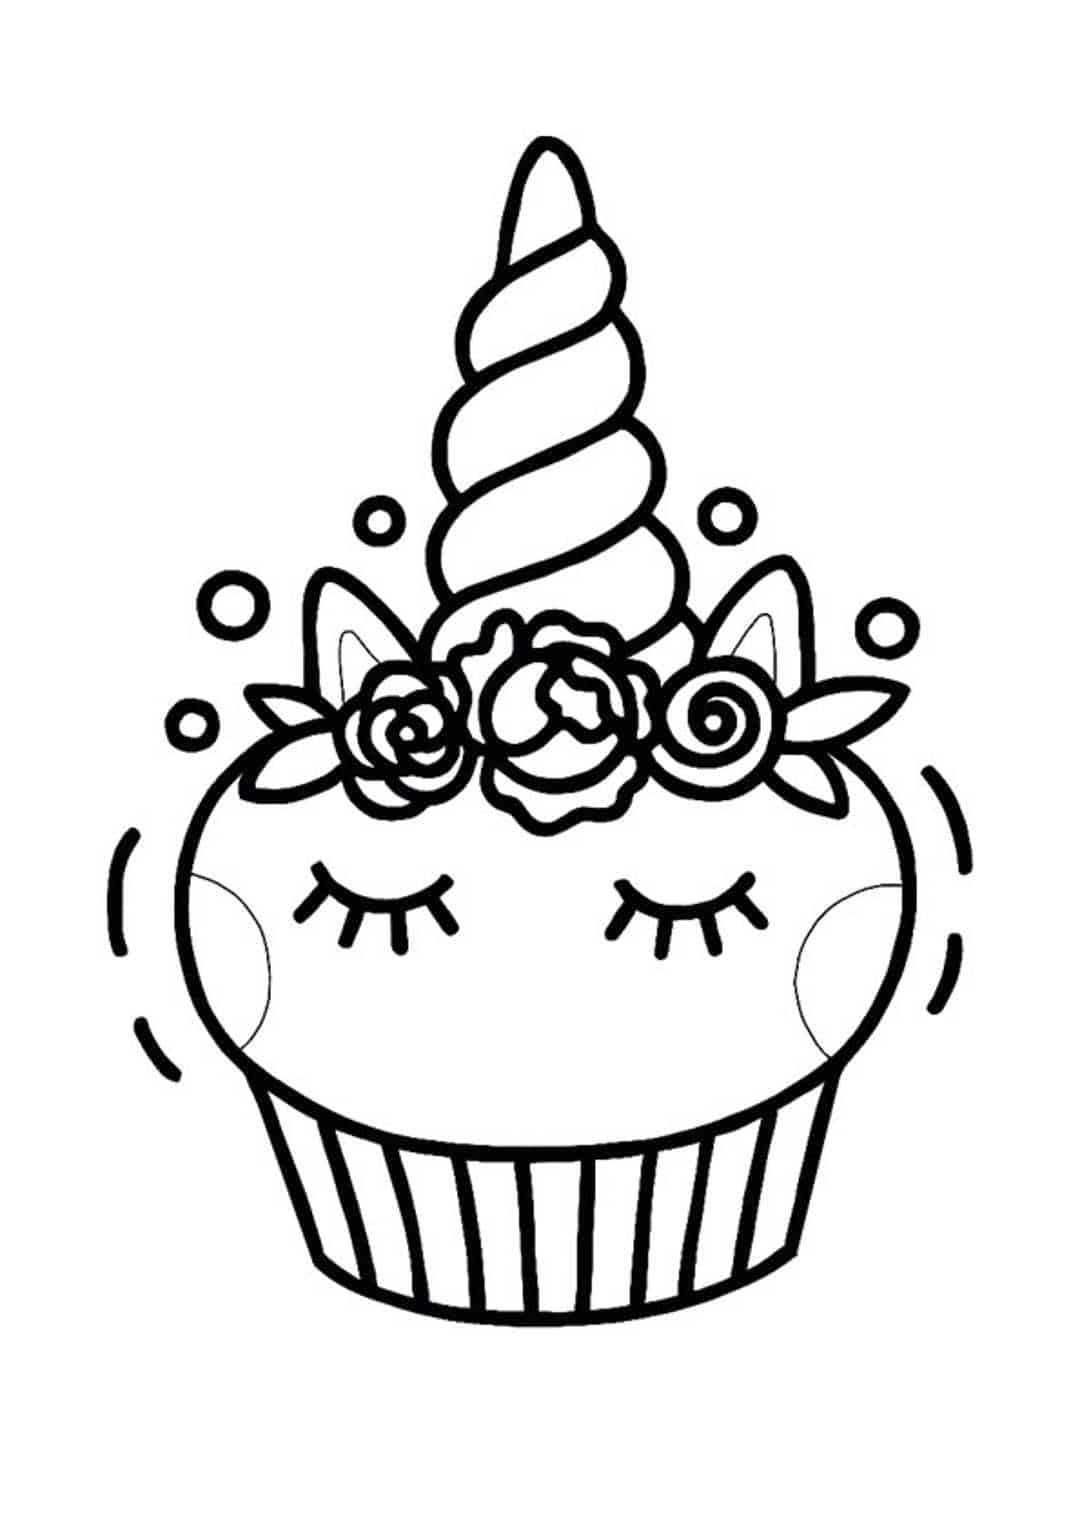 Unicorn cake coloring pages